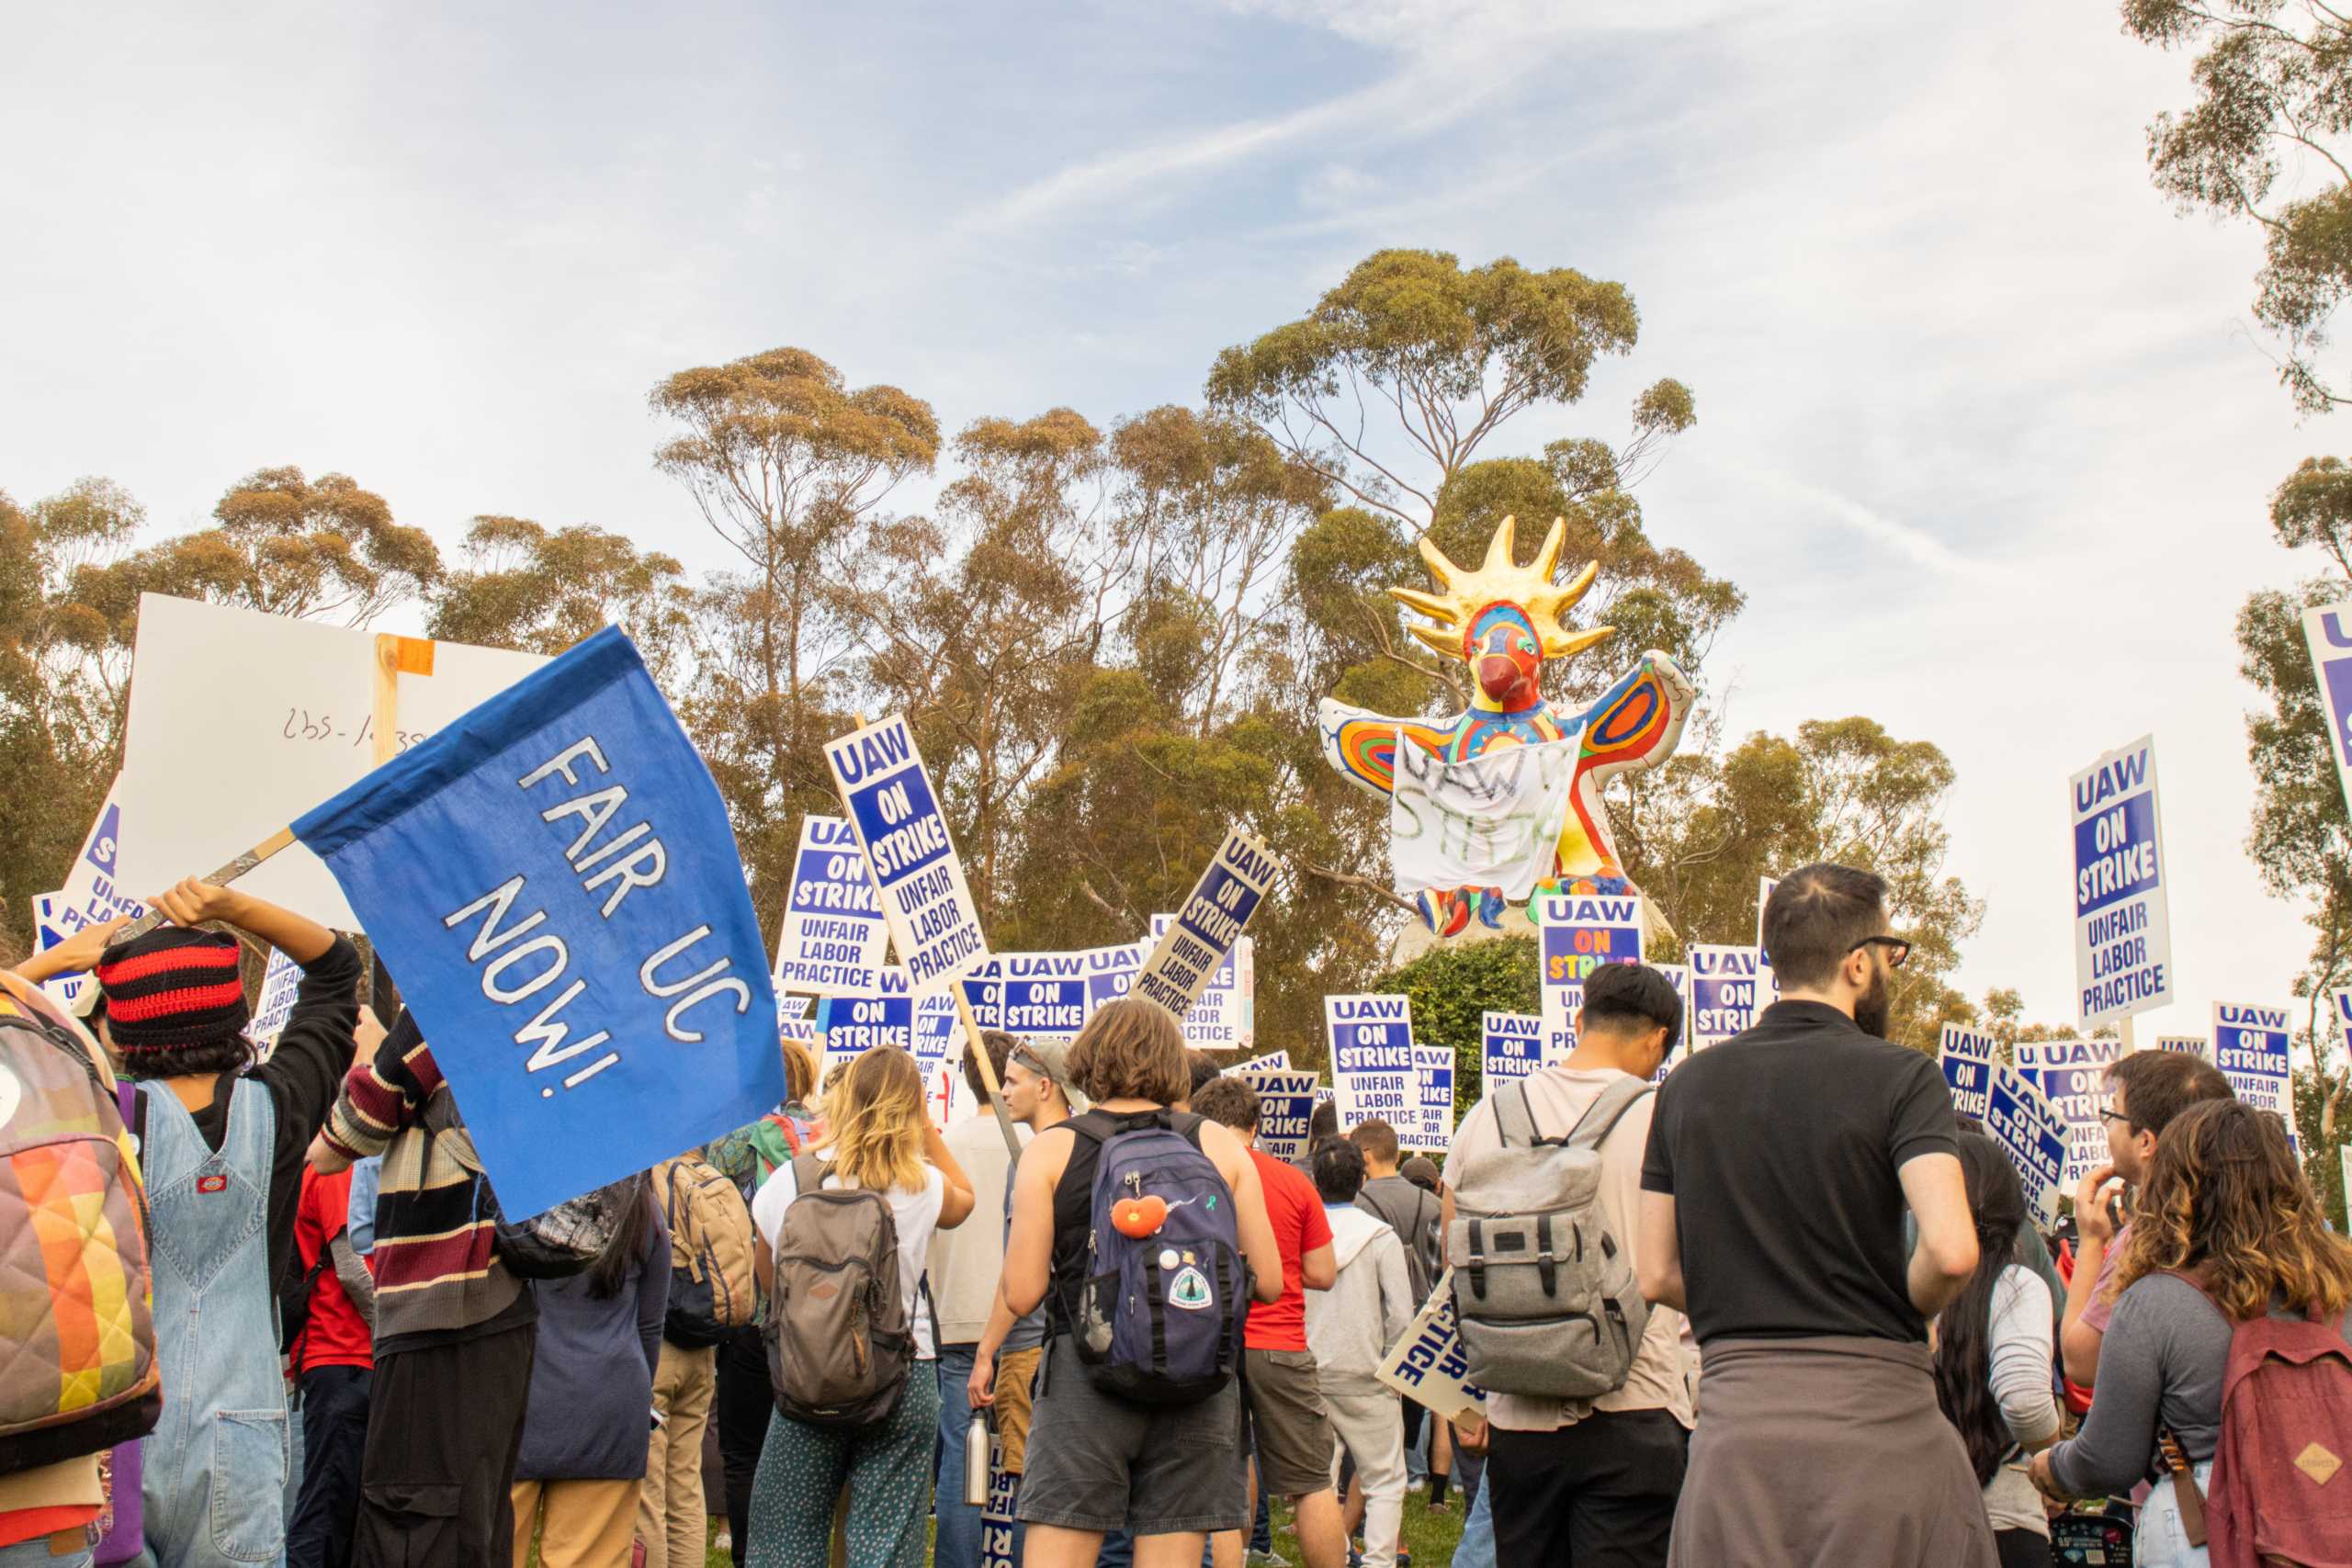 University of California Plans to Deduct Pay for Employees who Participated in Strike 